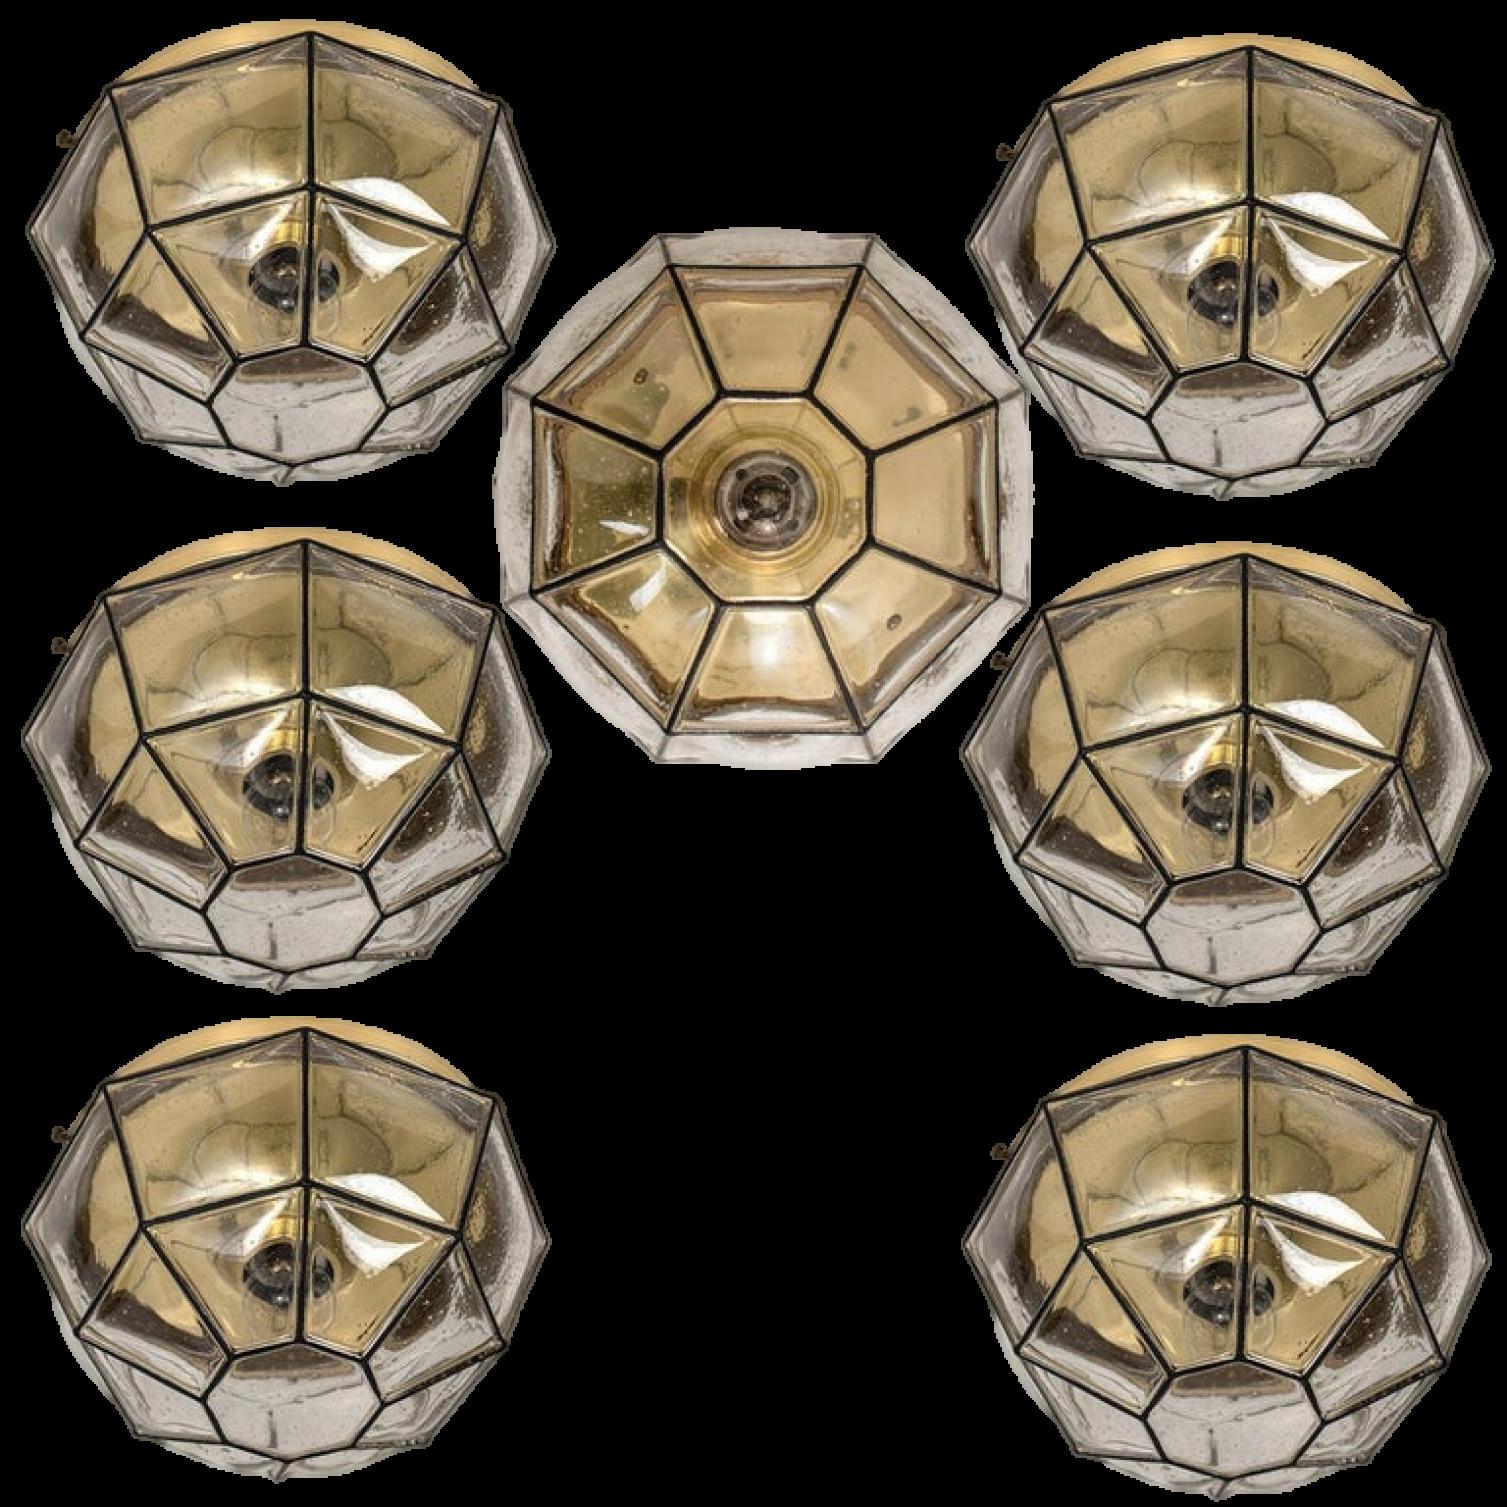 This beautiful and unique octagonal set of glass light flush mounts or wall lights were manufactured by Glashütte Limburg in Germany during the 1960s (late 1960s or early 1970s). Beautiful craftsmanship. Each lamp, made from elaborate clear glass